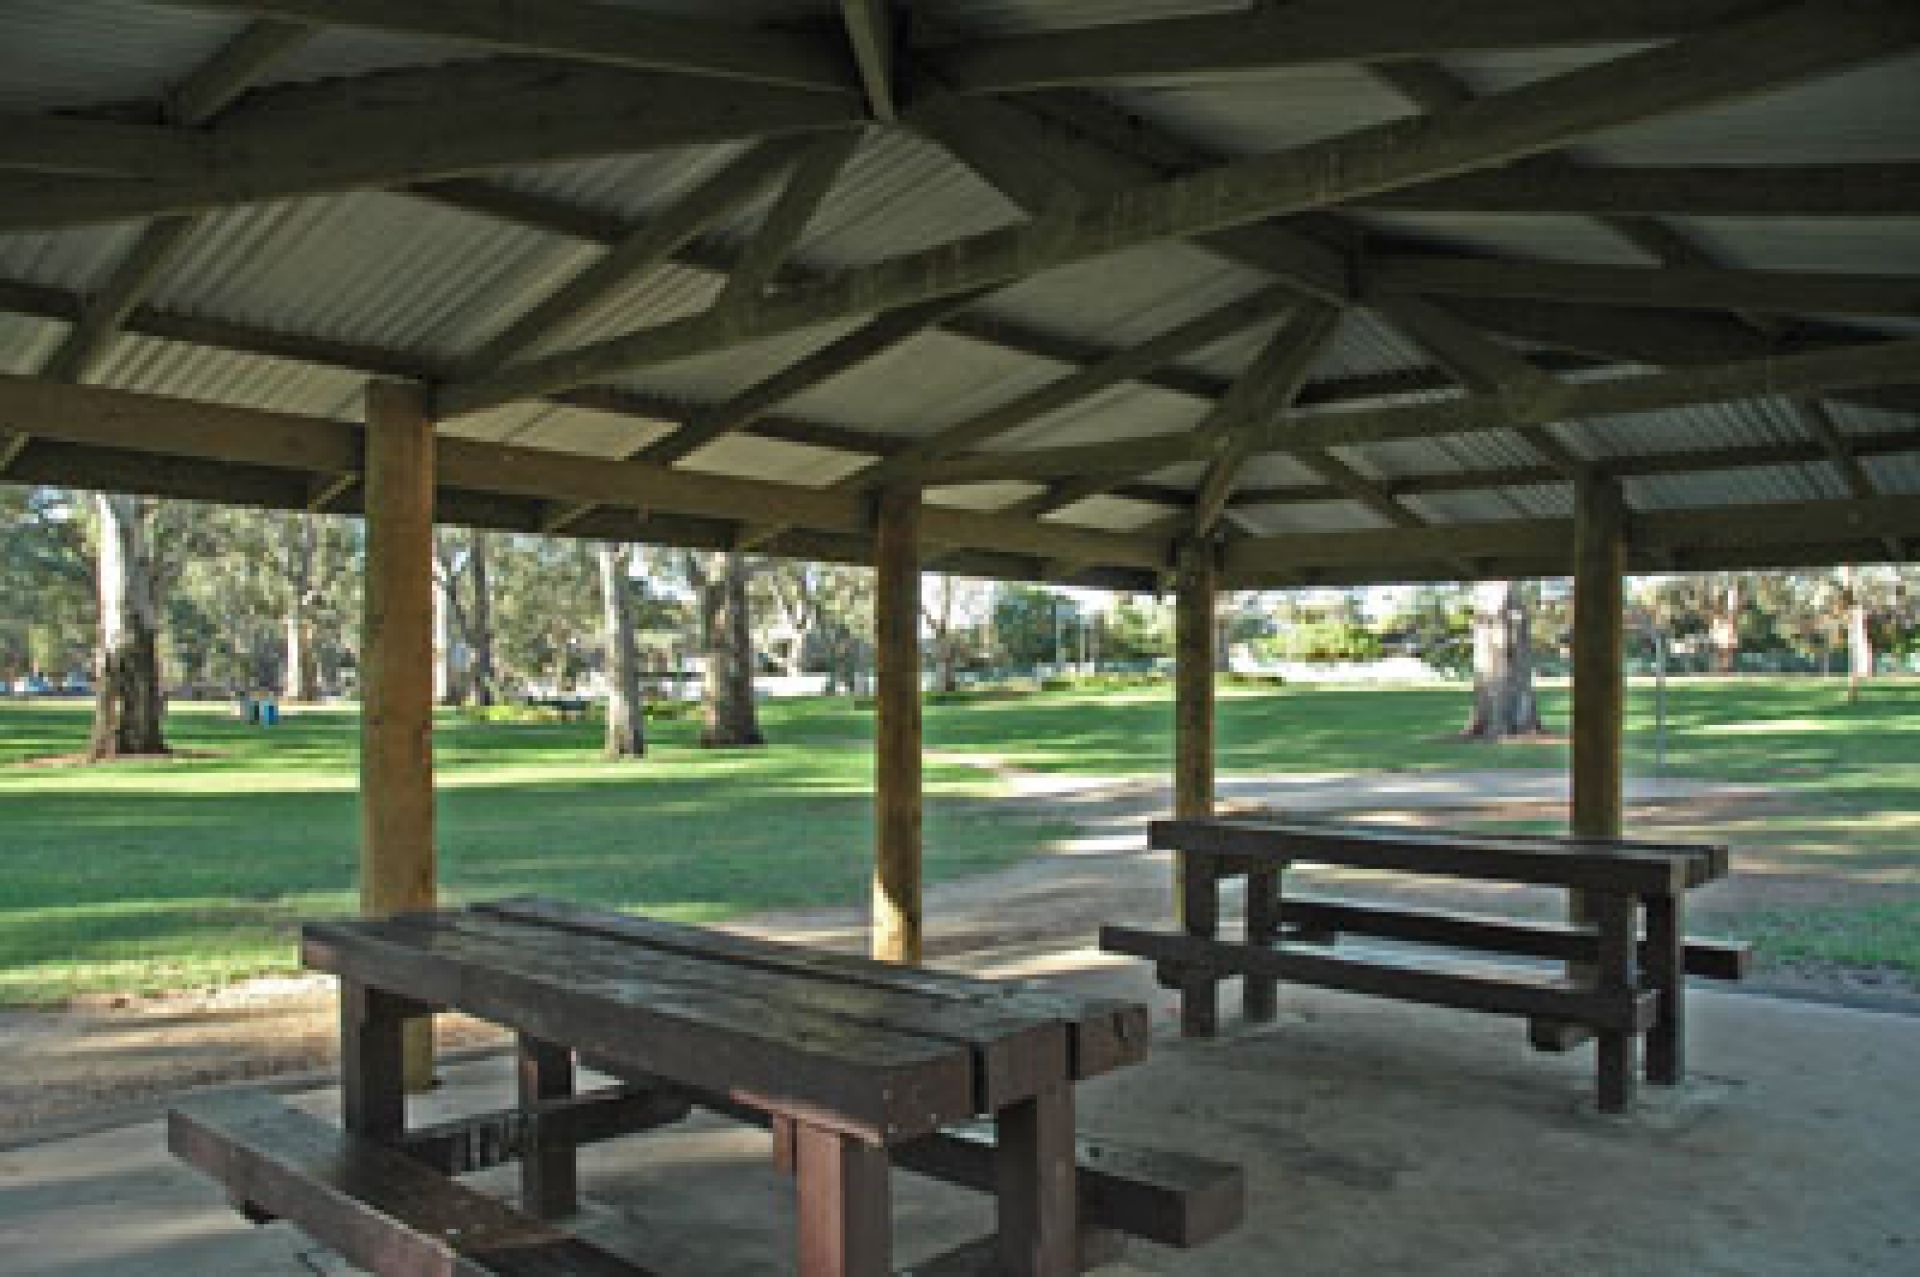 The Gums Reserve Shaded Picnic Area